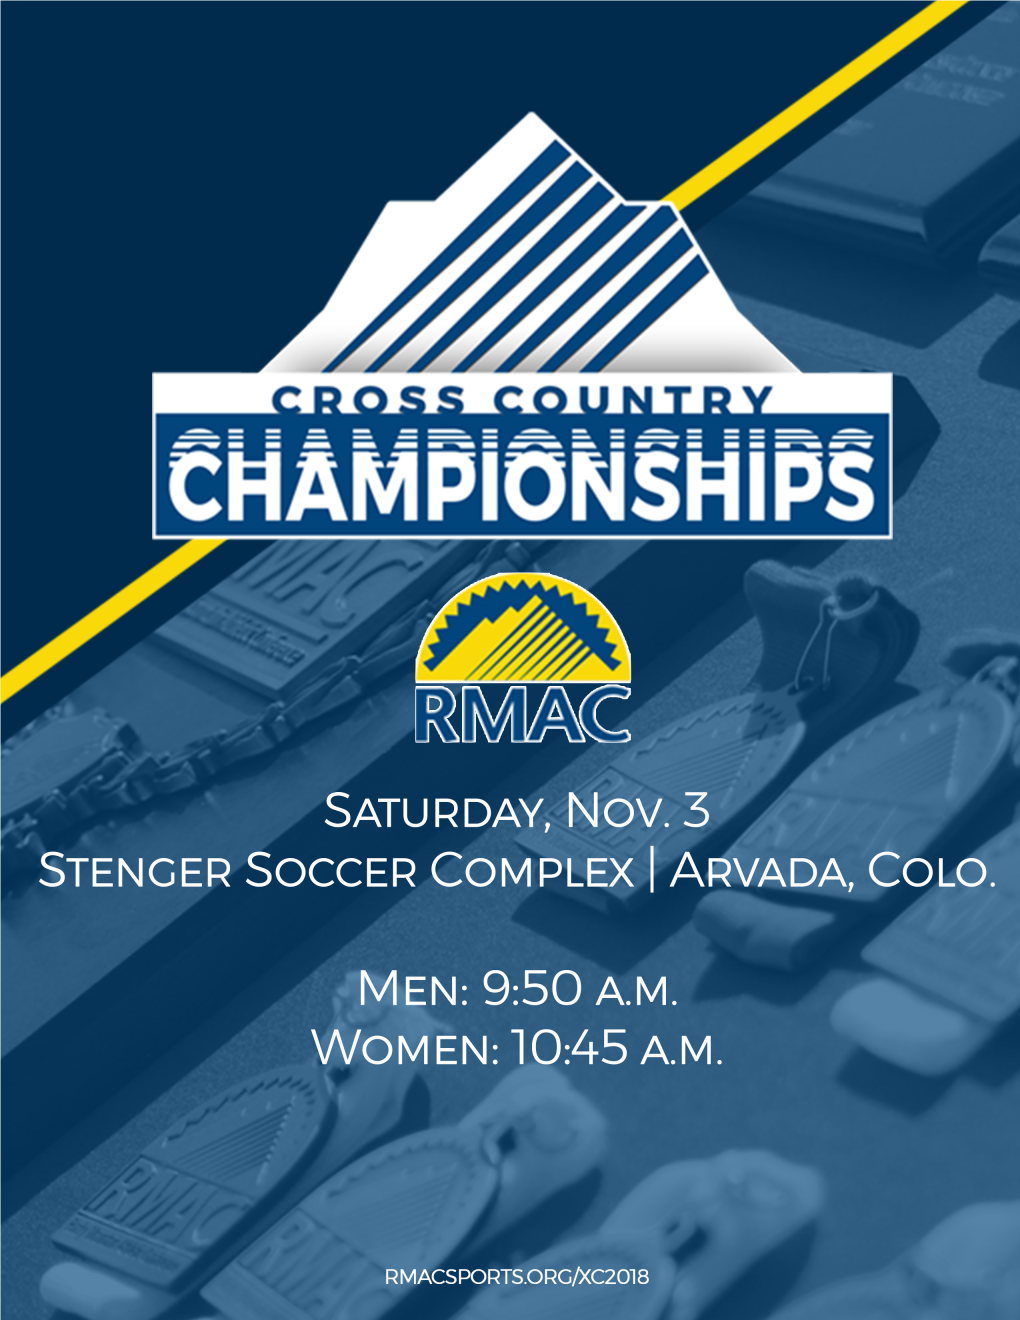 RMACSPORTS.ORG #Rmacxc #Championshipselevated 2018 ROCKY MOUNTAIN ATHLETIC CONFERENCE CROSS COUNTRY CHAMPIONSHIPS ARVADA, COLO